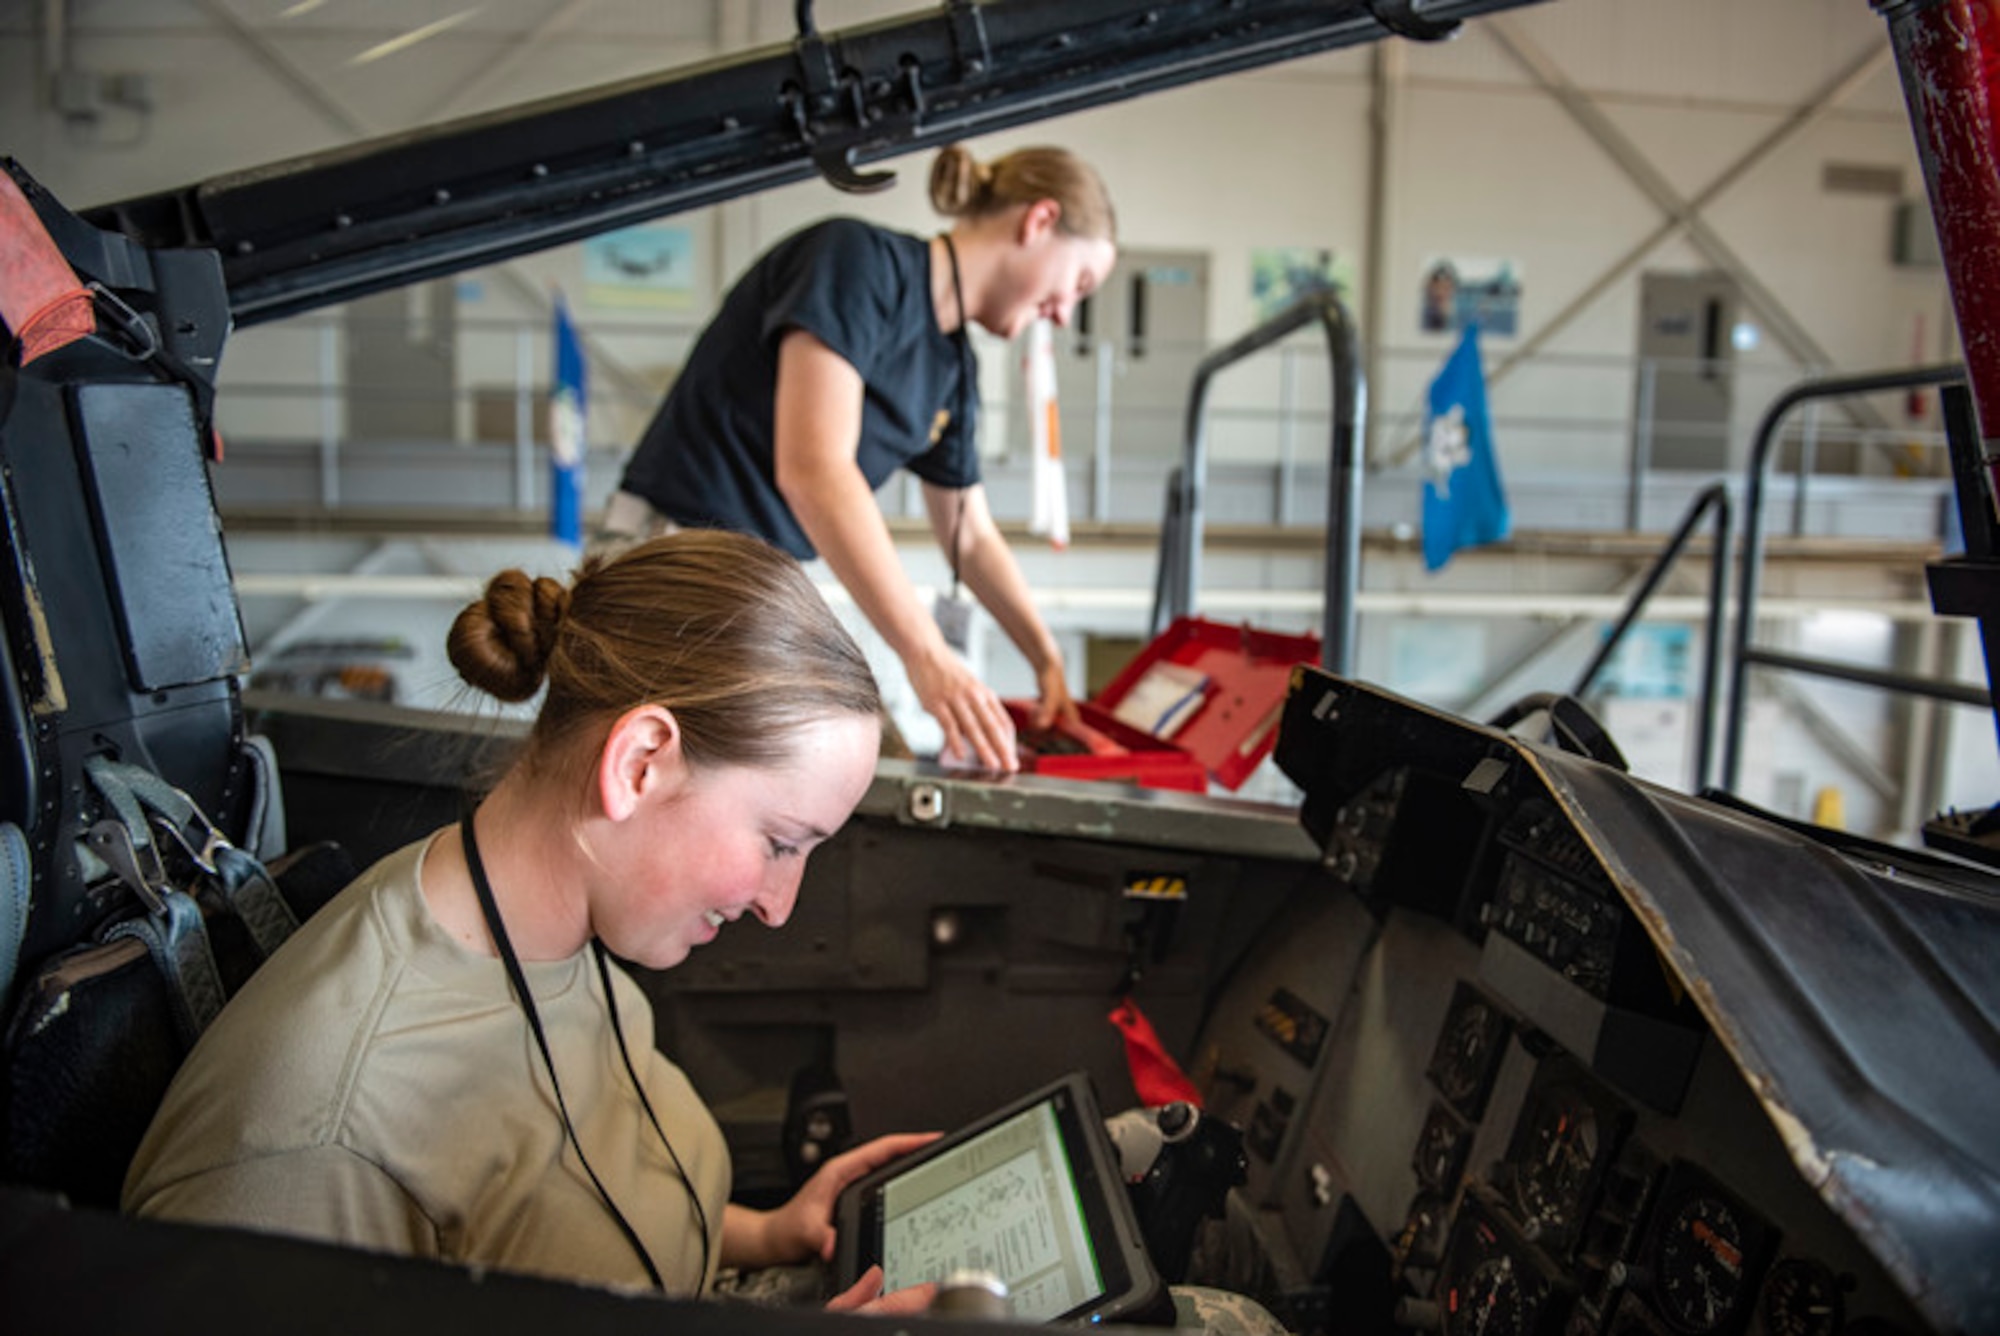 Airman 1st Class Christine Smith and Airman 1st Class Kaylie Cunningham, 364th Training Squadron electrical and environmental apprentice course students, remove and install an oxygen regulator on an F-15 Eagle at Sheppard Air Force Base, Texas, June 14, 2019. In an effort to expand learning opportunities for Airmen and enable training and education from any device, Air Education and Training Command has begun the Learning Wi-Fi Service project to install commercial wireless Internet across the command’s installations. (U.S. Air Force photo by Airman 1st Class Pedro Tenorio)